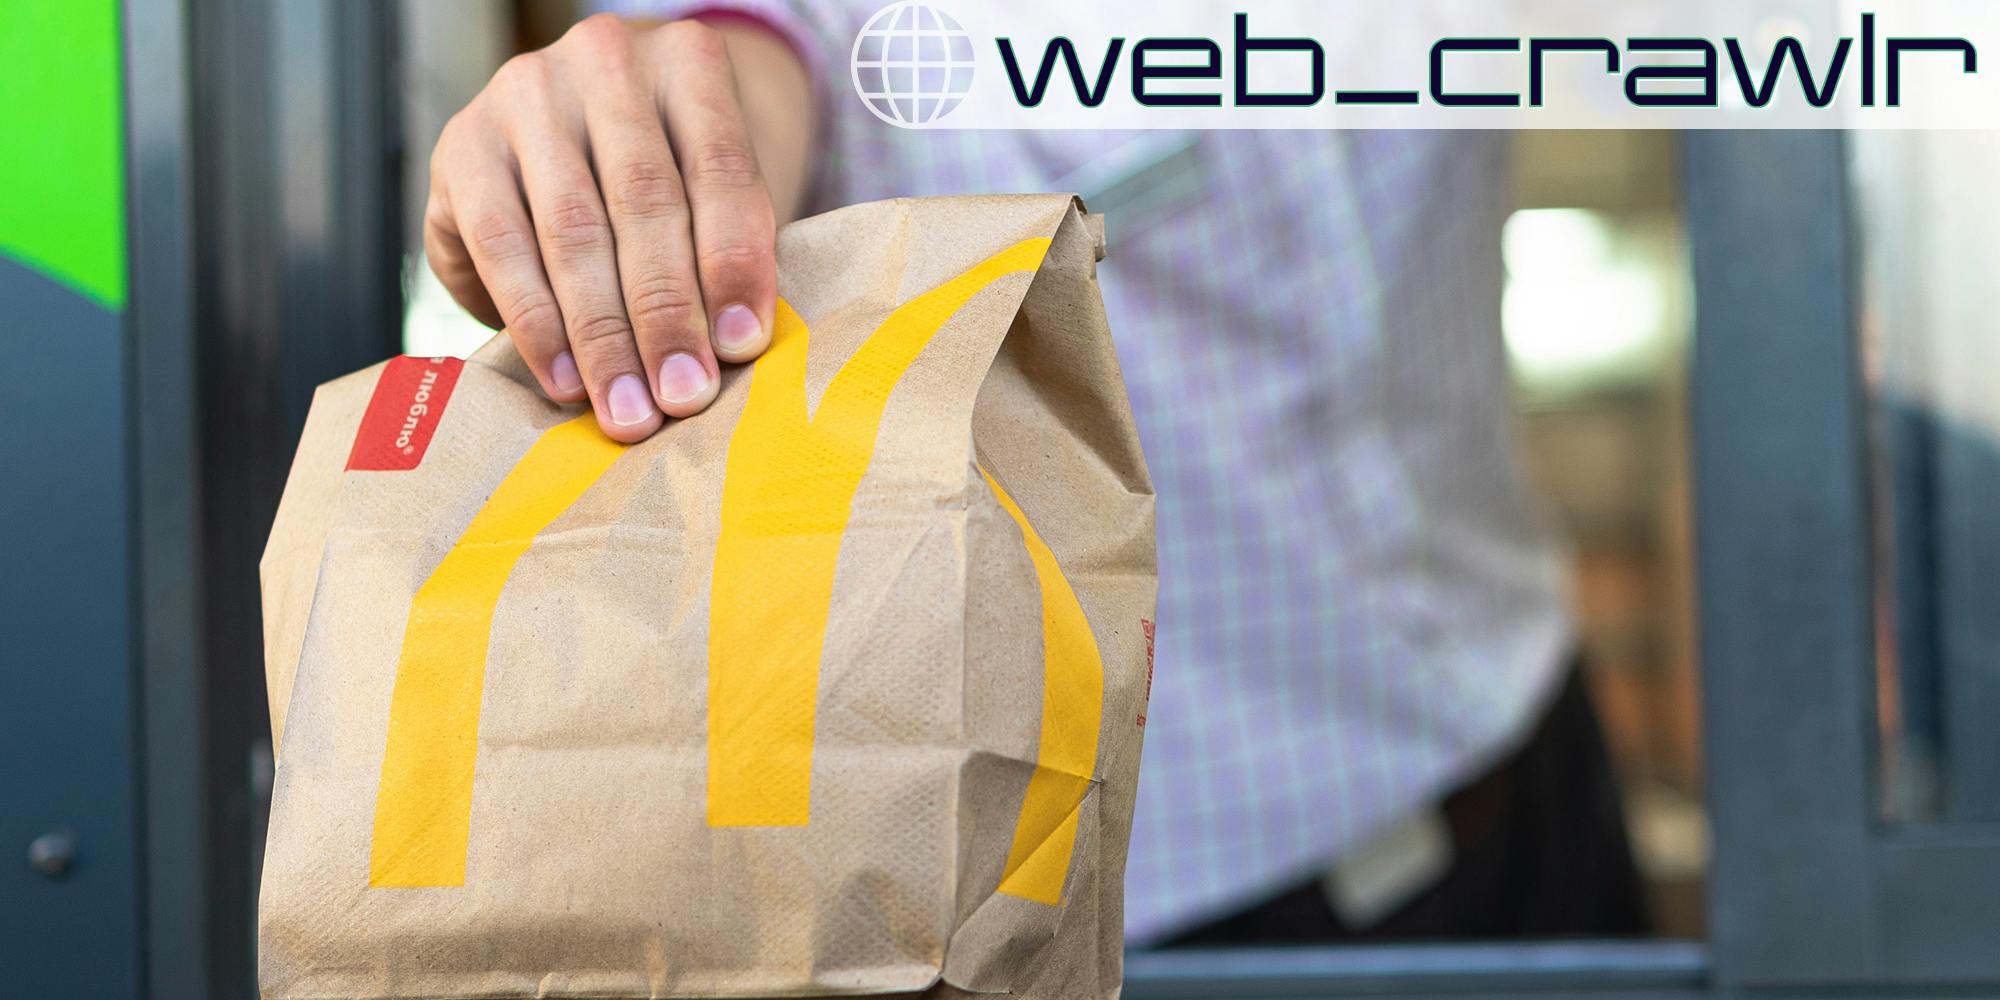 A person holding a McDonald's bag. The Daily Dot newsletter web_crawlr logo is in the top right corner.